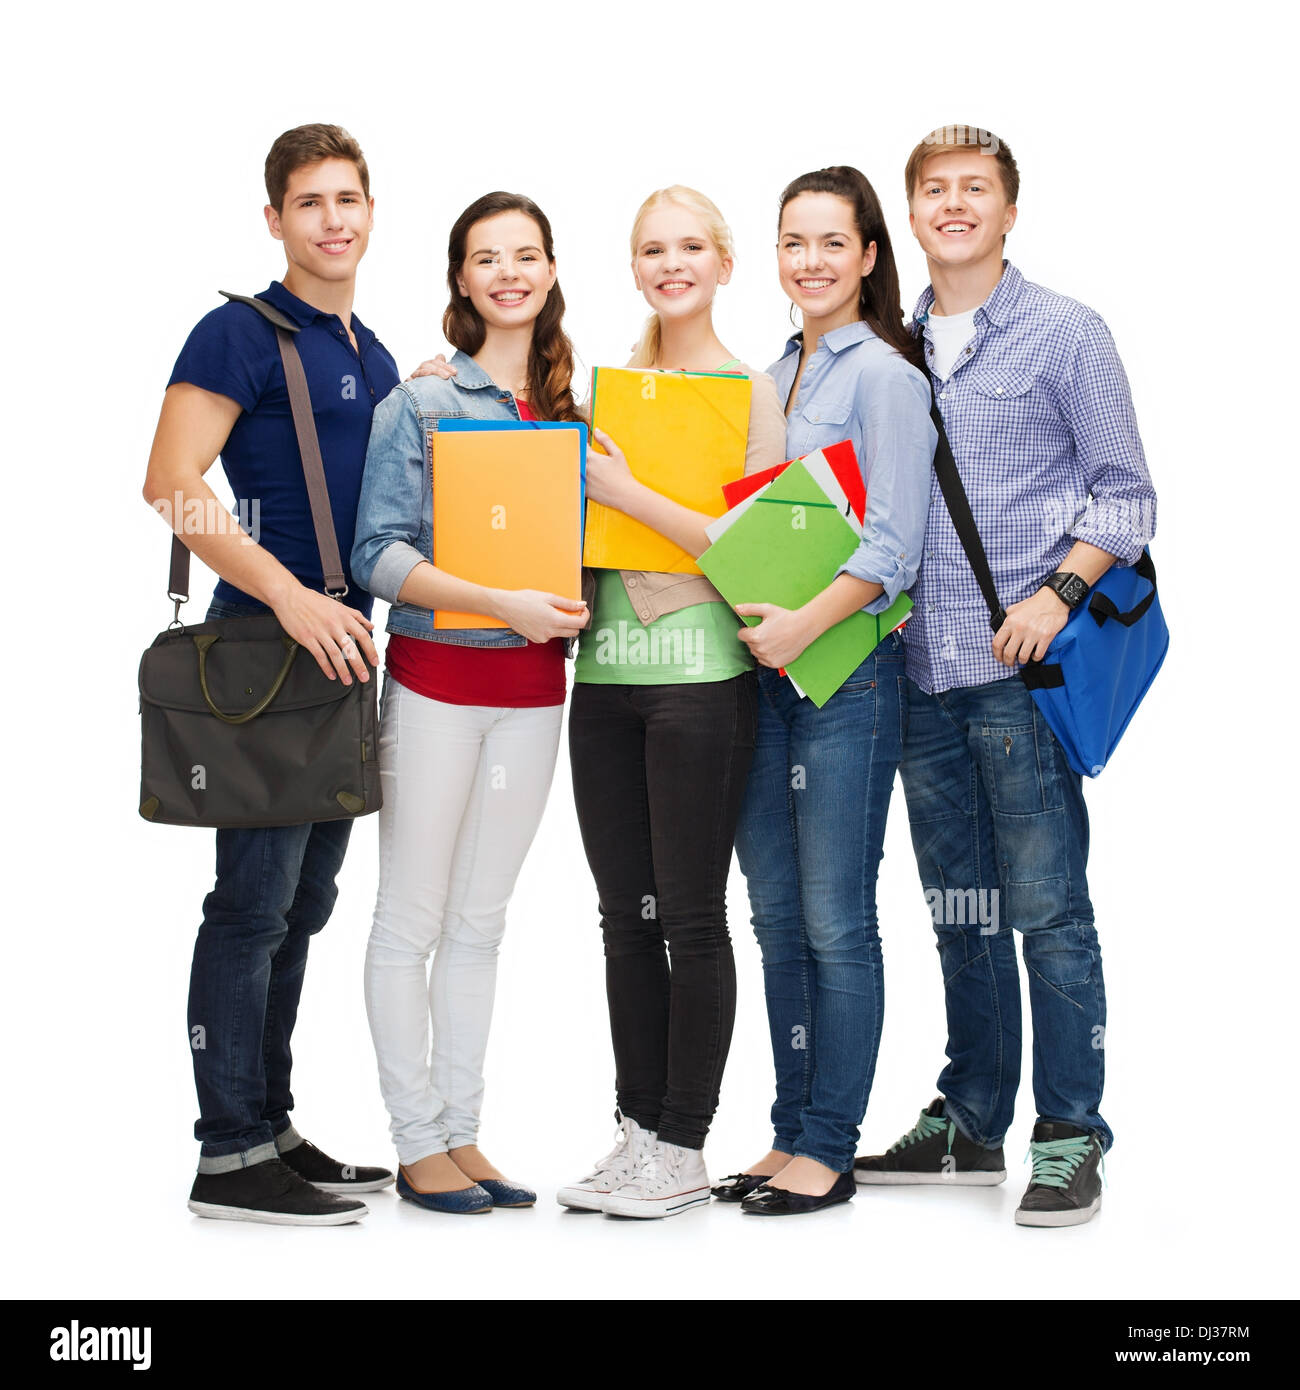 group of smiling students standing Stock Photo